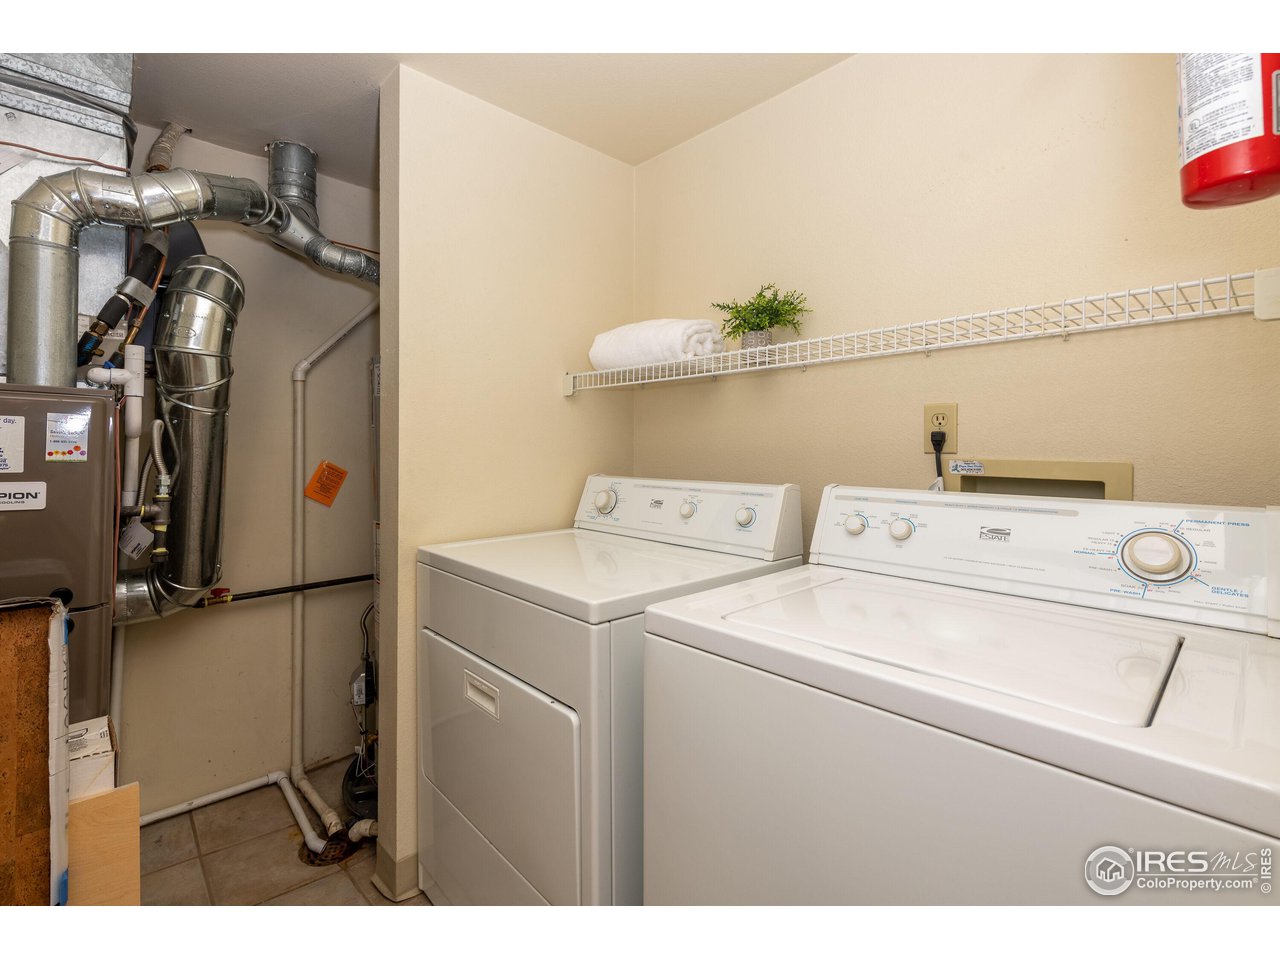 Full laundry/ HVAC/utility room washer/dryer included